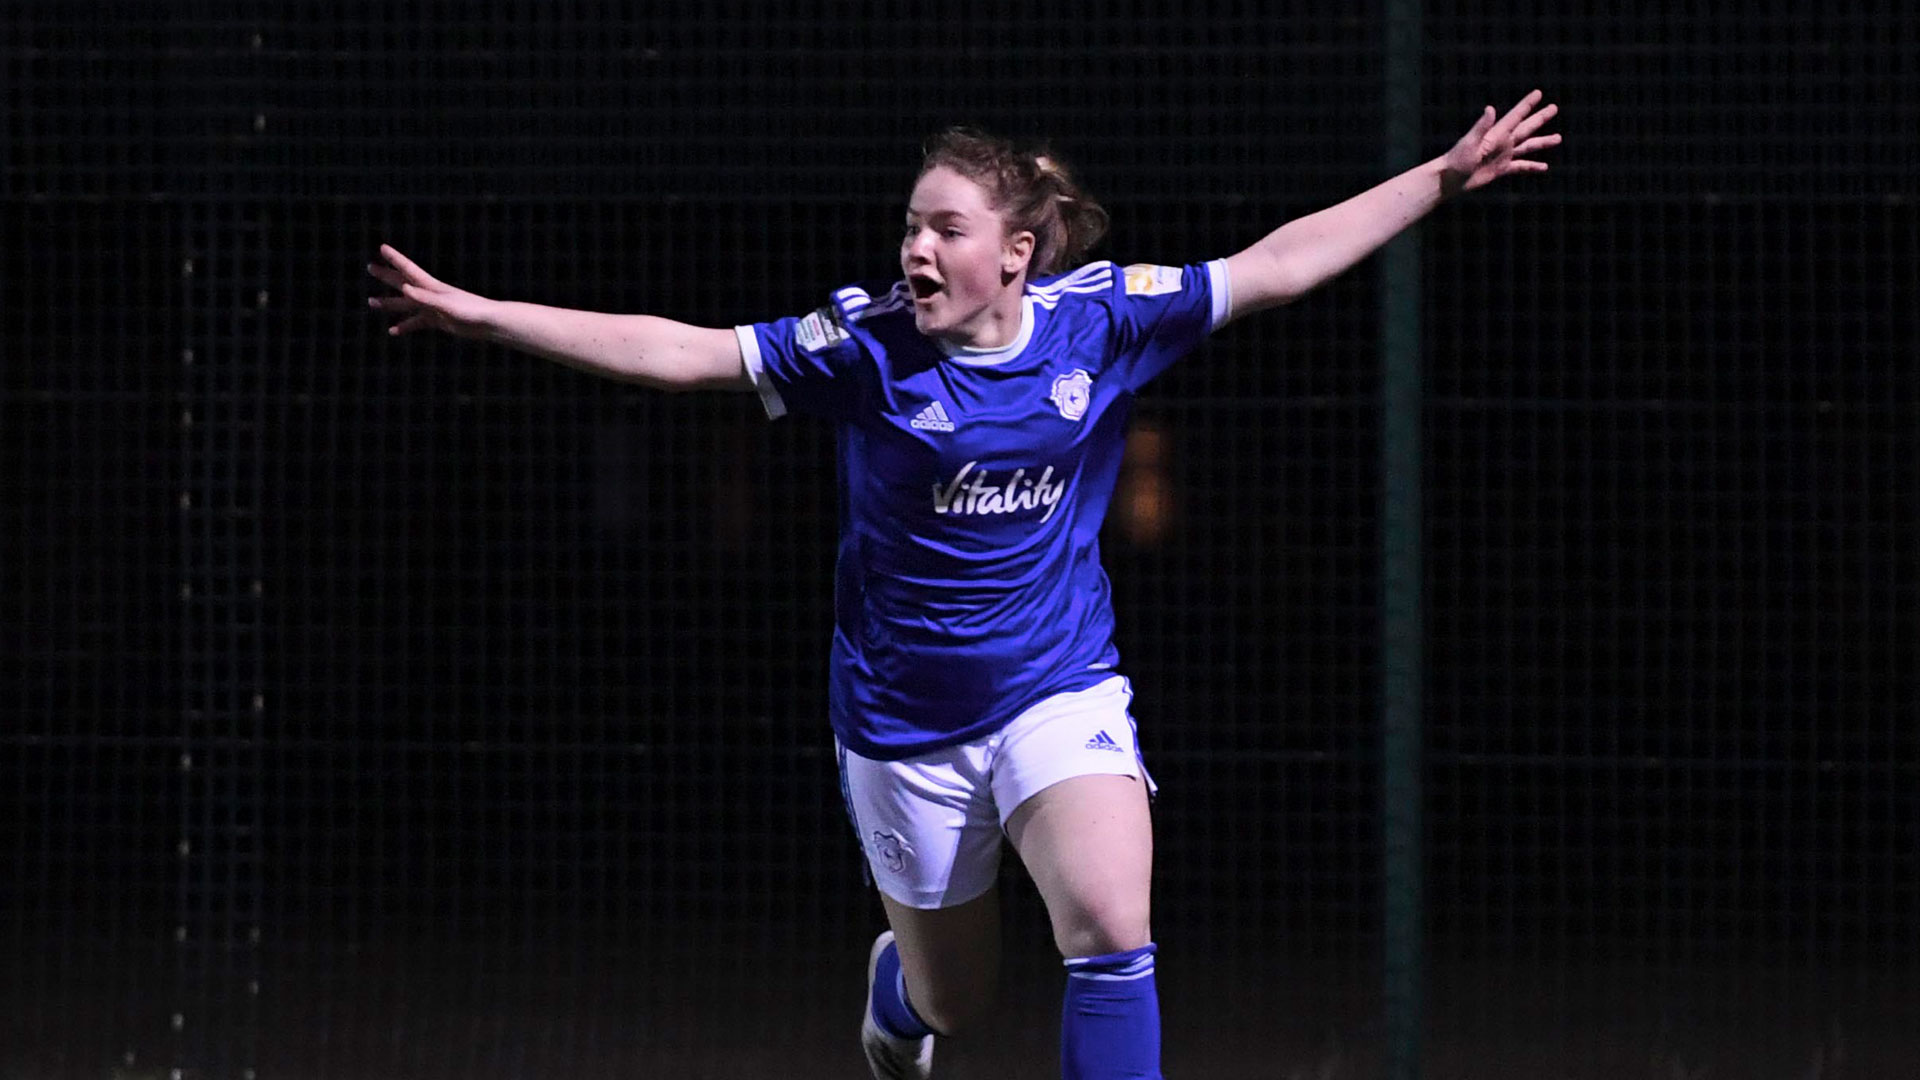 Phoebie Poole, scorer of a stunner against Cardiff Met, which won #ClubGOTM...